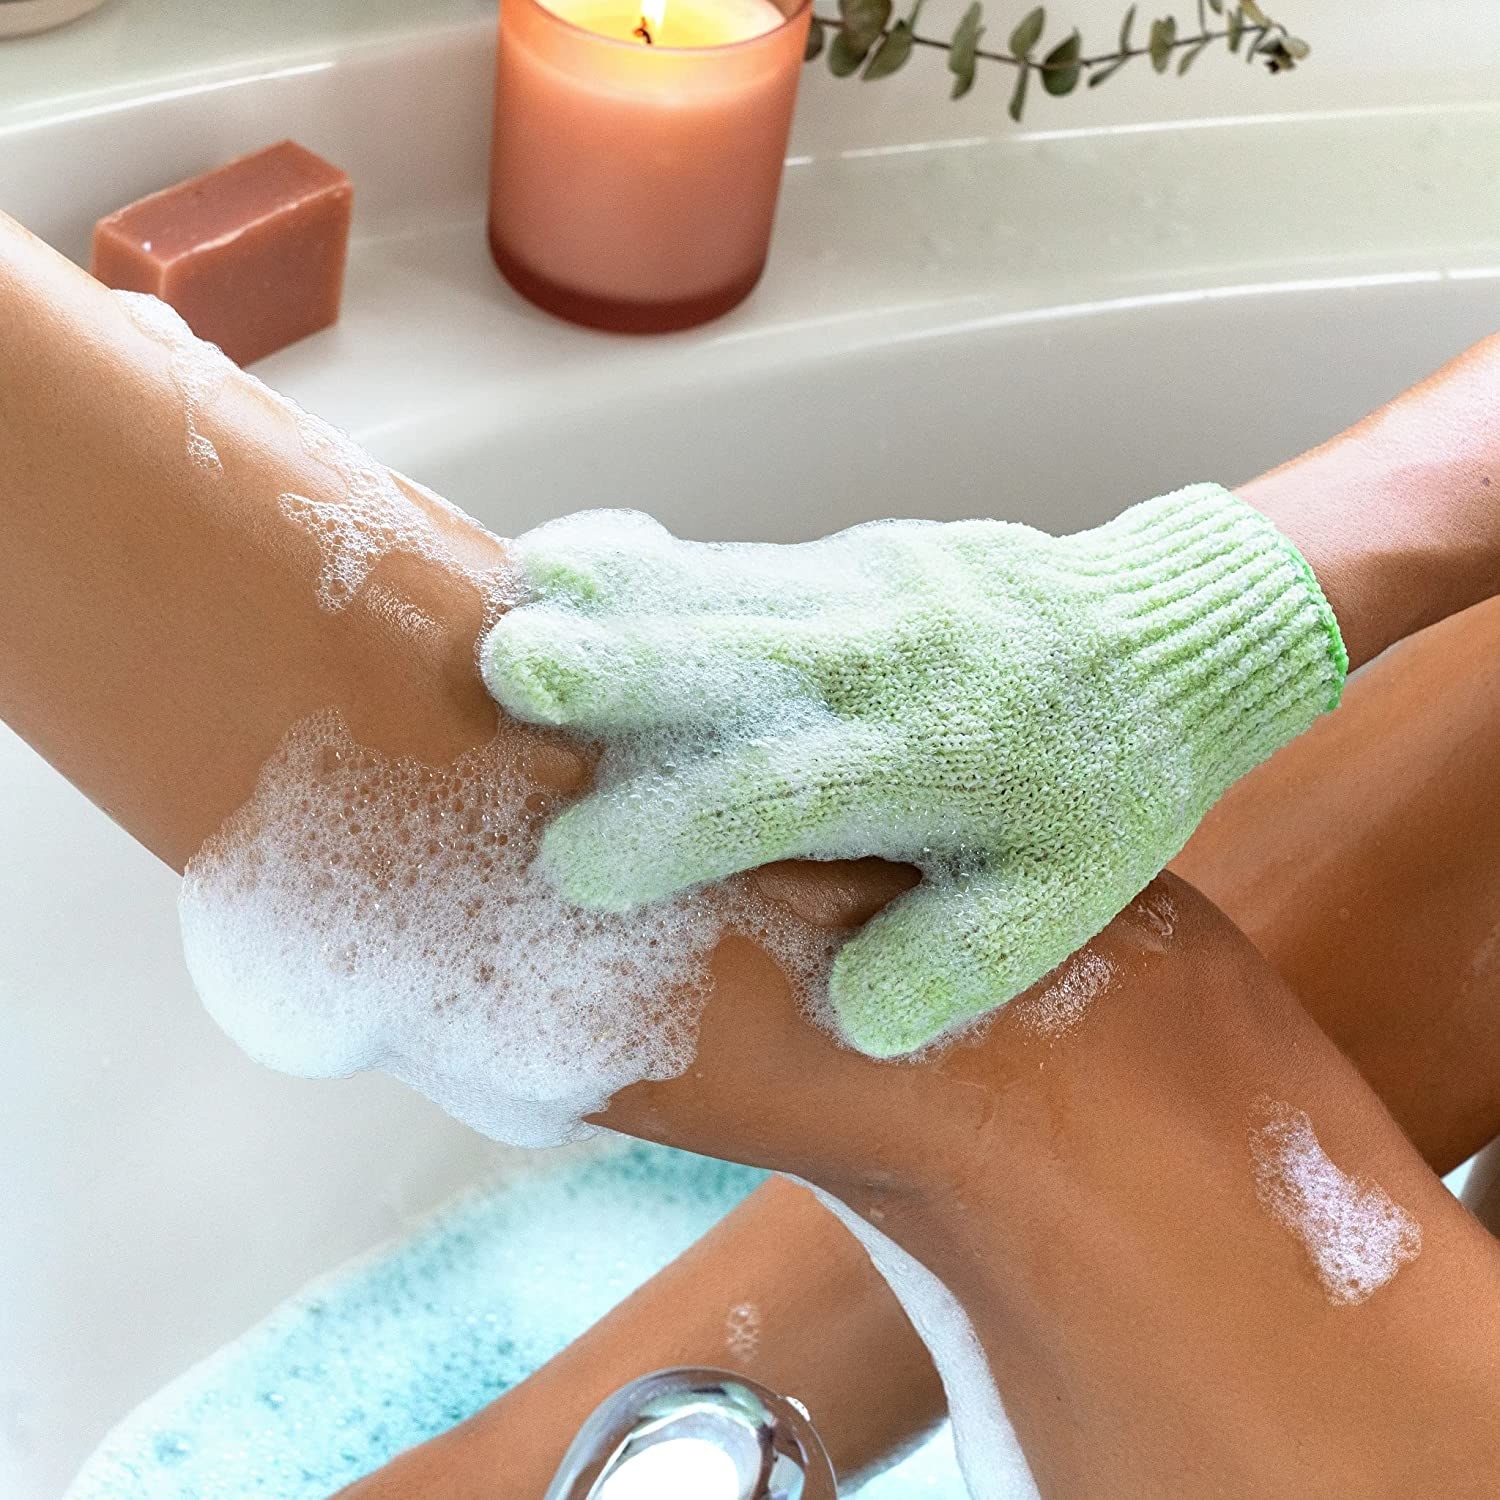 person in the bath scrubbing their leg with the glove